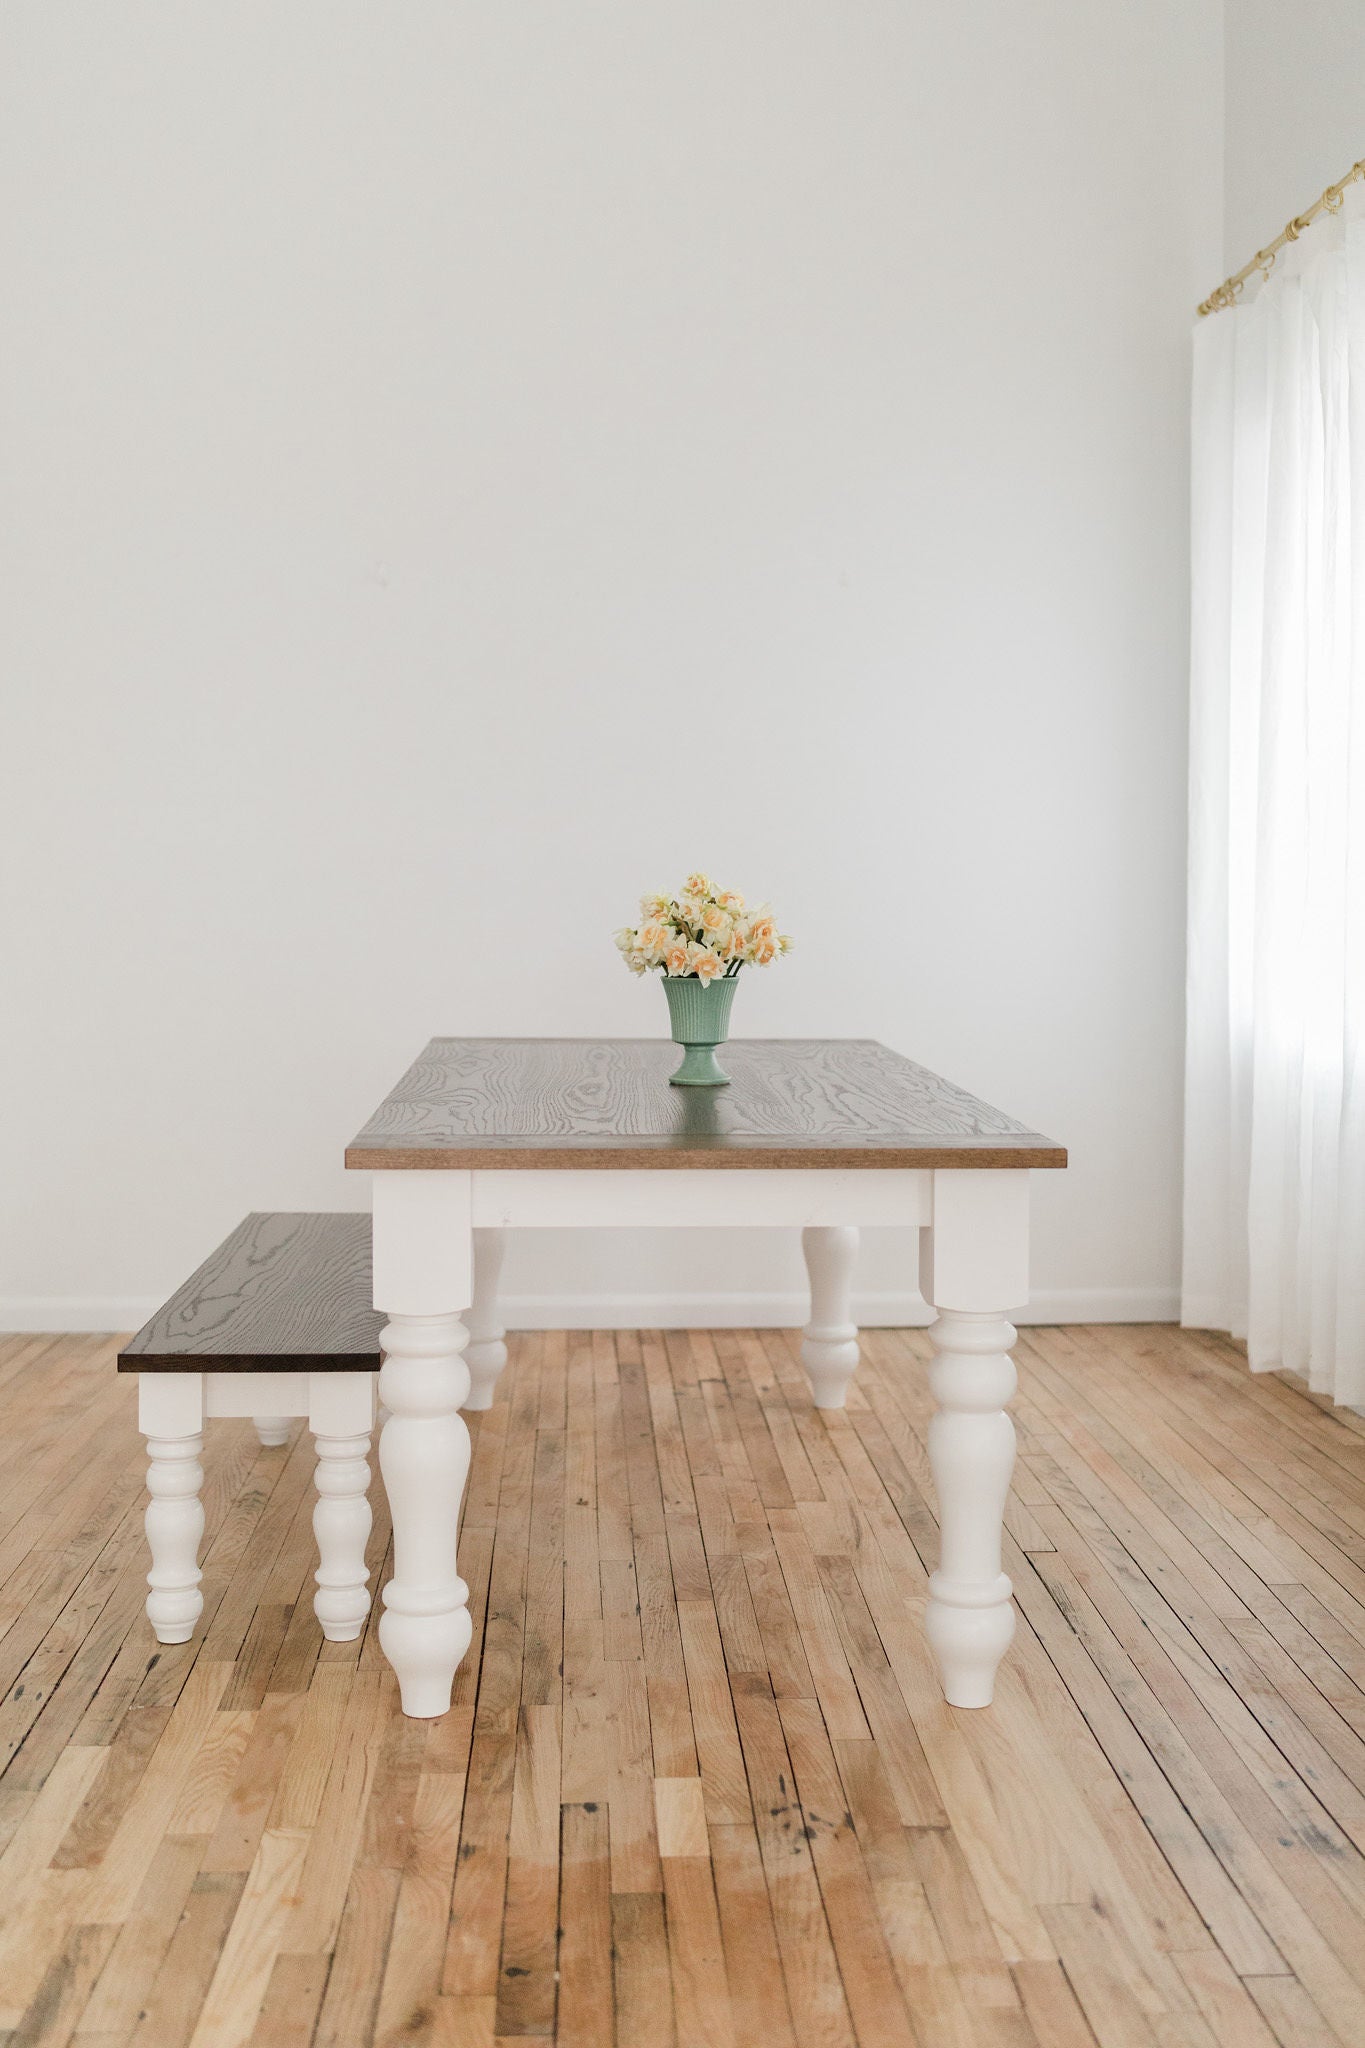 Kennedy Dining Table